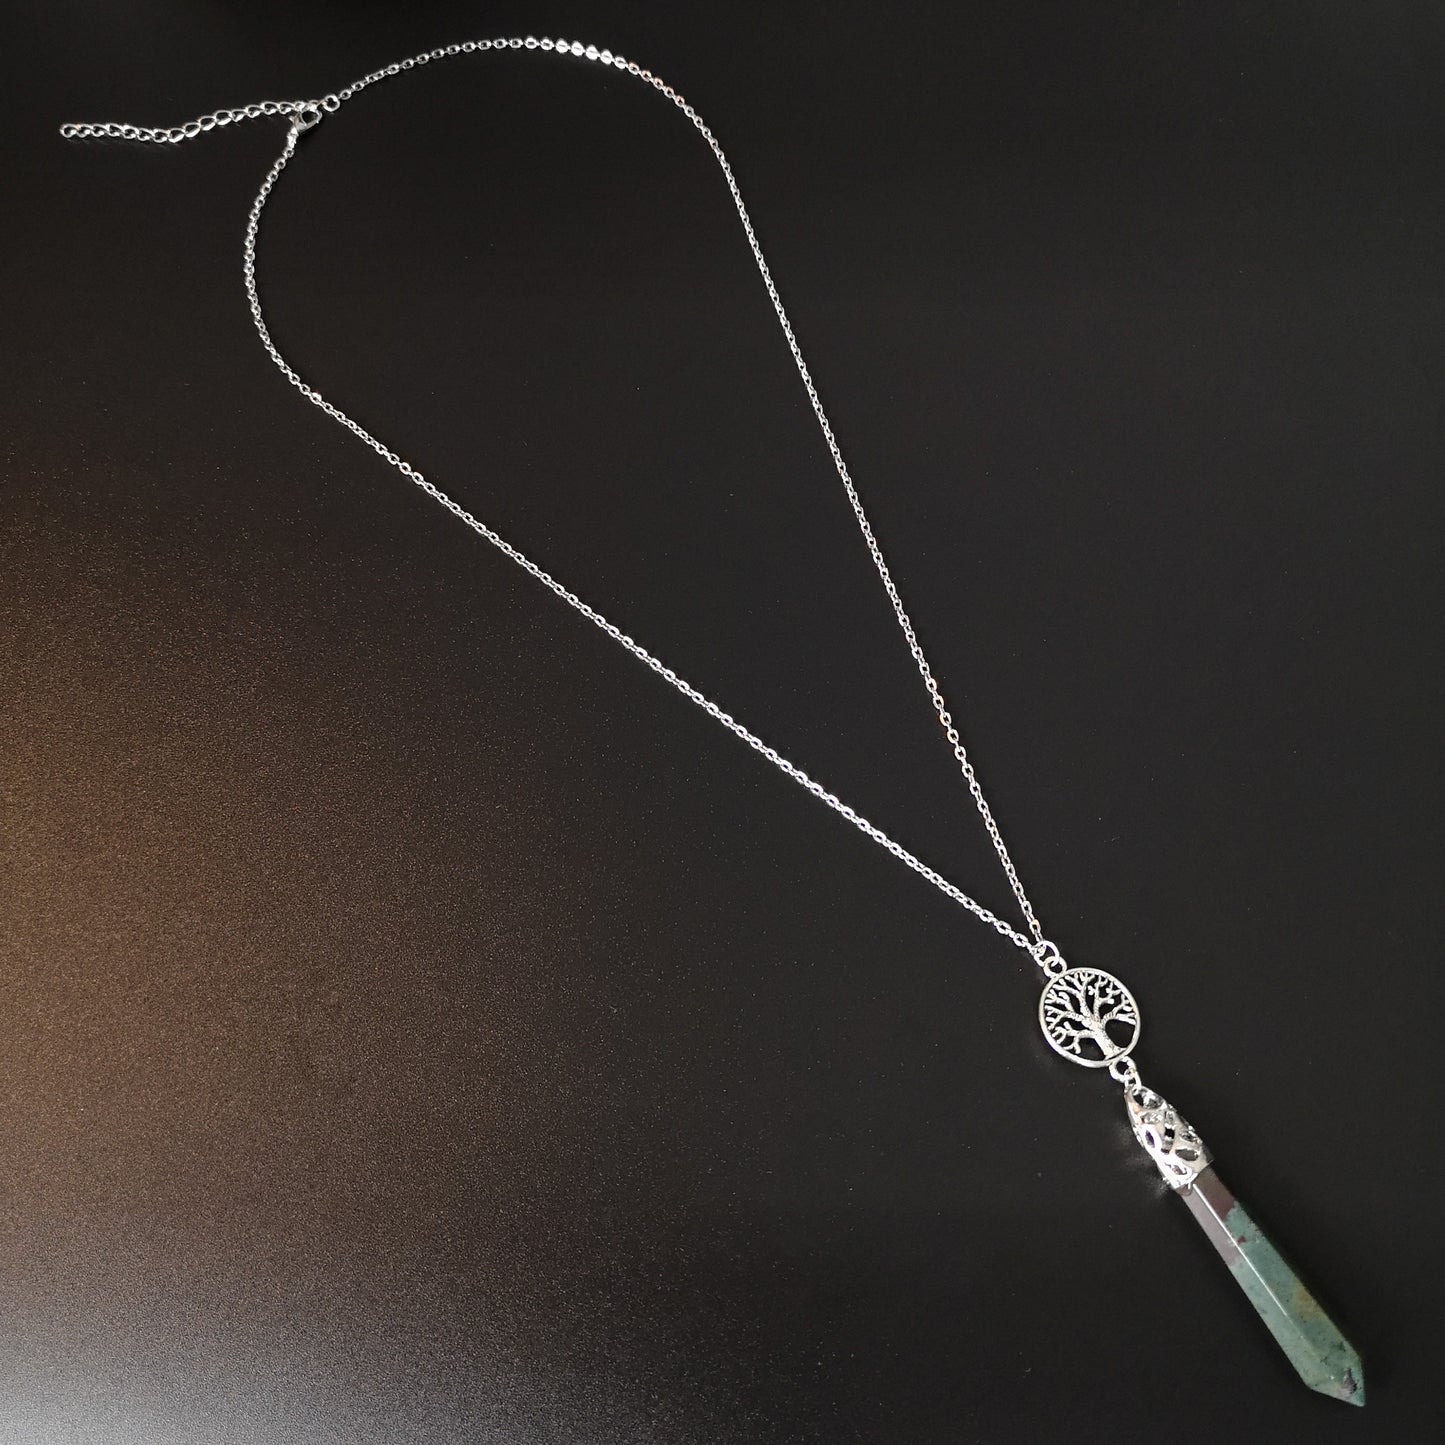 Moss agate and tree of life pendulum necklace Baguette Magick